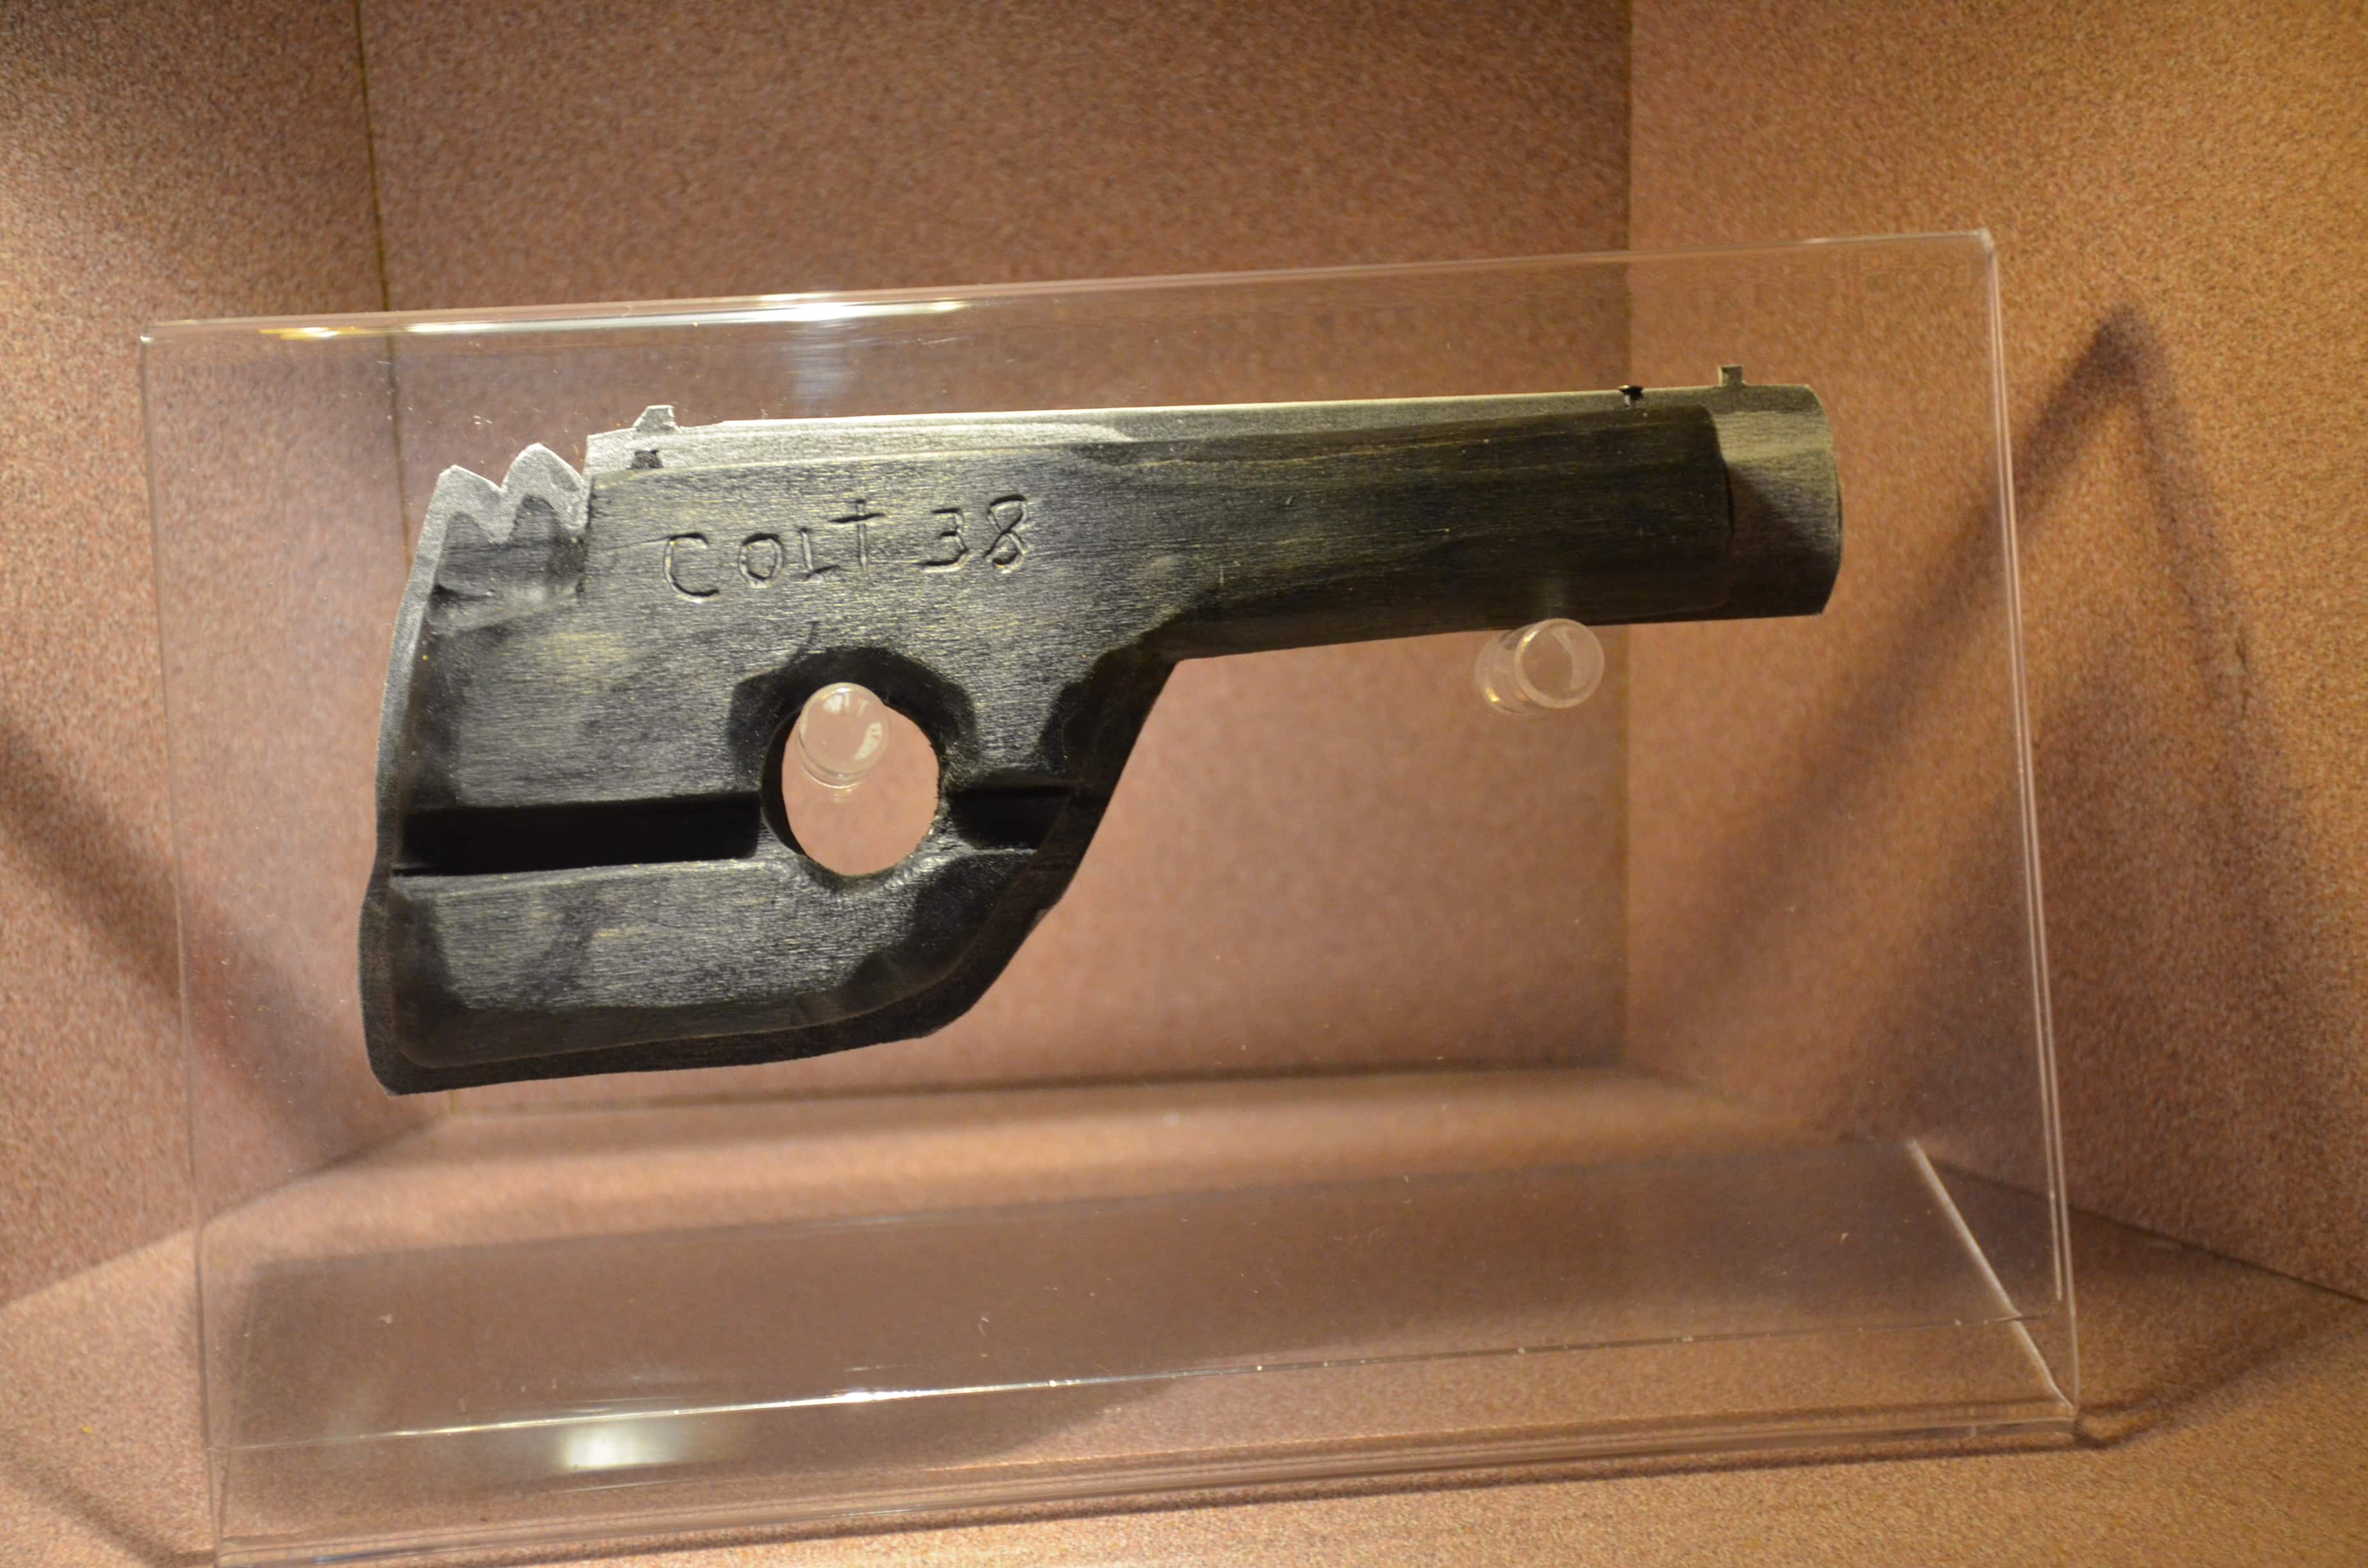 The wooden gun at the John Dillinger Museum in Crown Point, Indiana